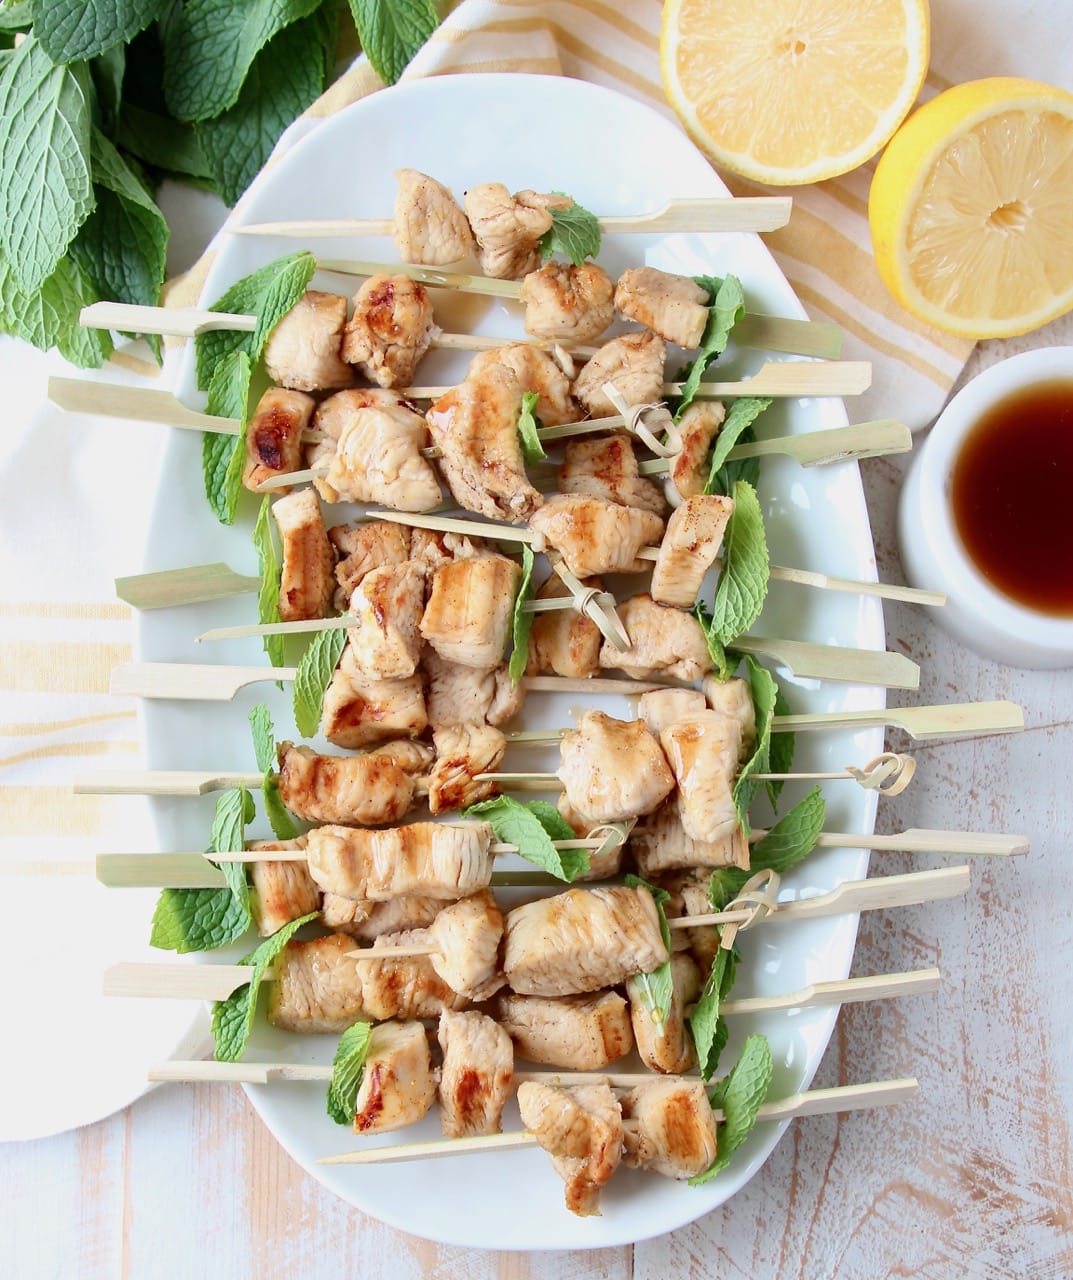 Grilled bourbon chicken on skewers with mint leaves